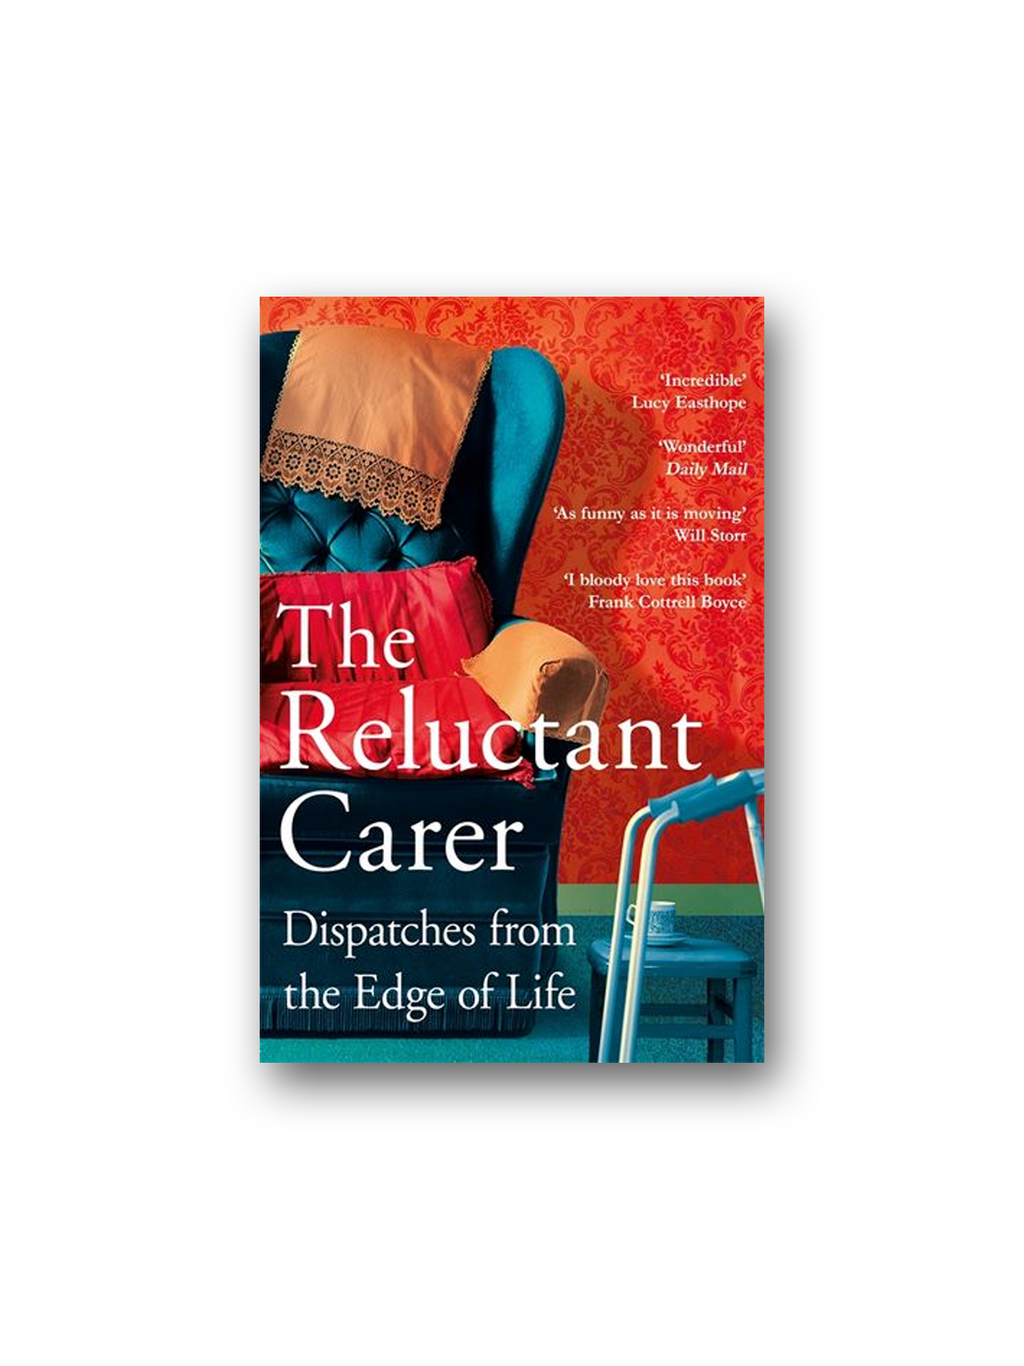 The Reluctant Carer: Dispatches from the Edge of Life